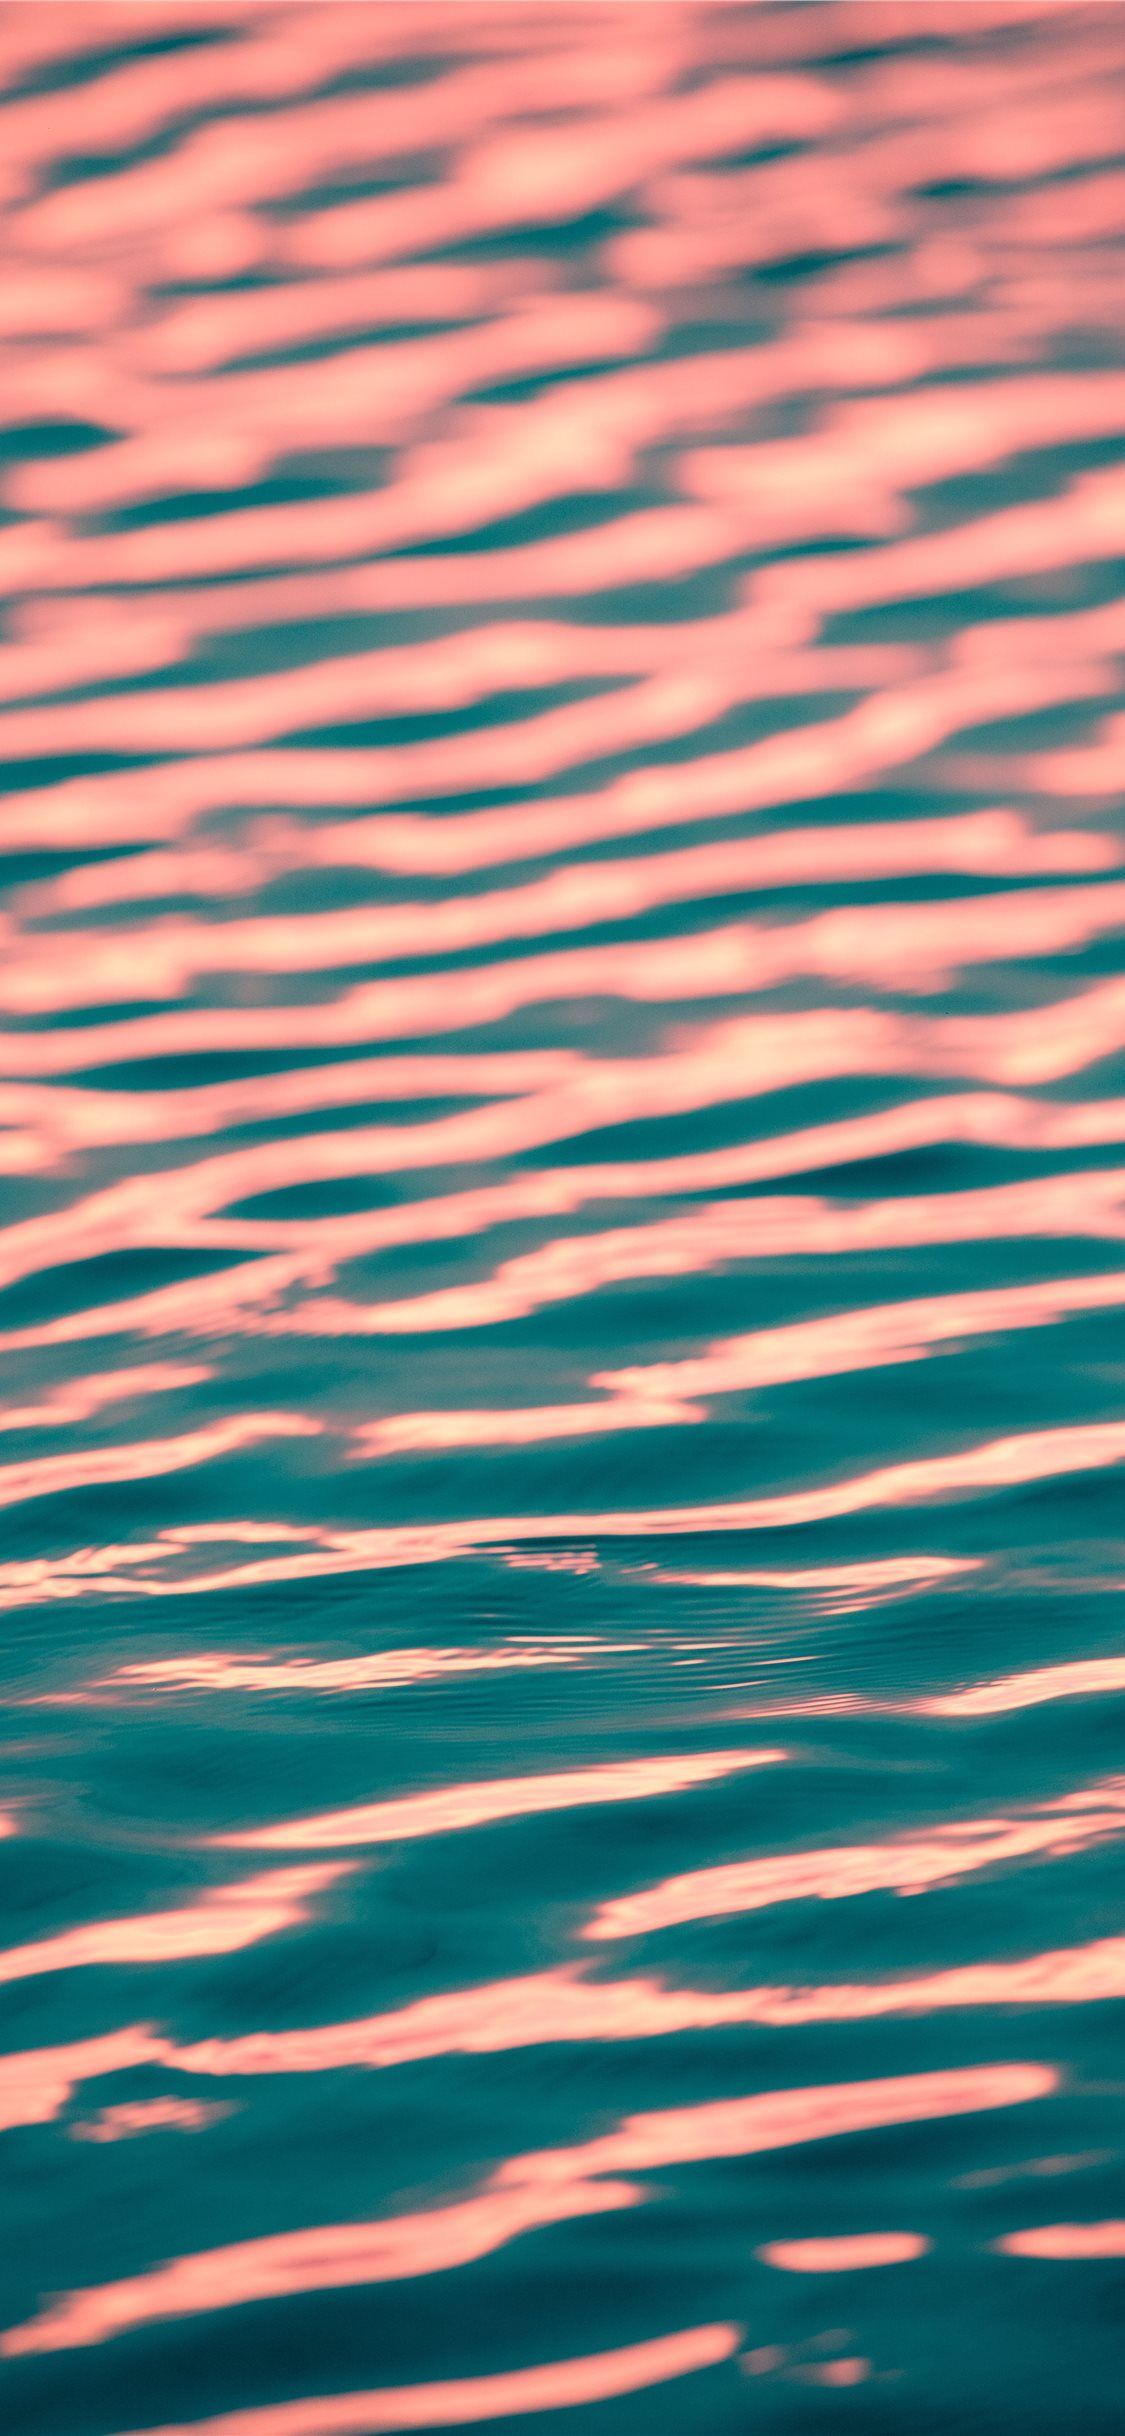 close up photo of calm body of w Wallpaper. iPhone 6 plus wallpaper, Wallpaper, Close up photo